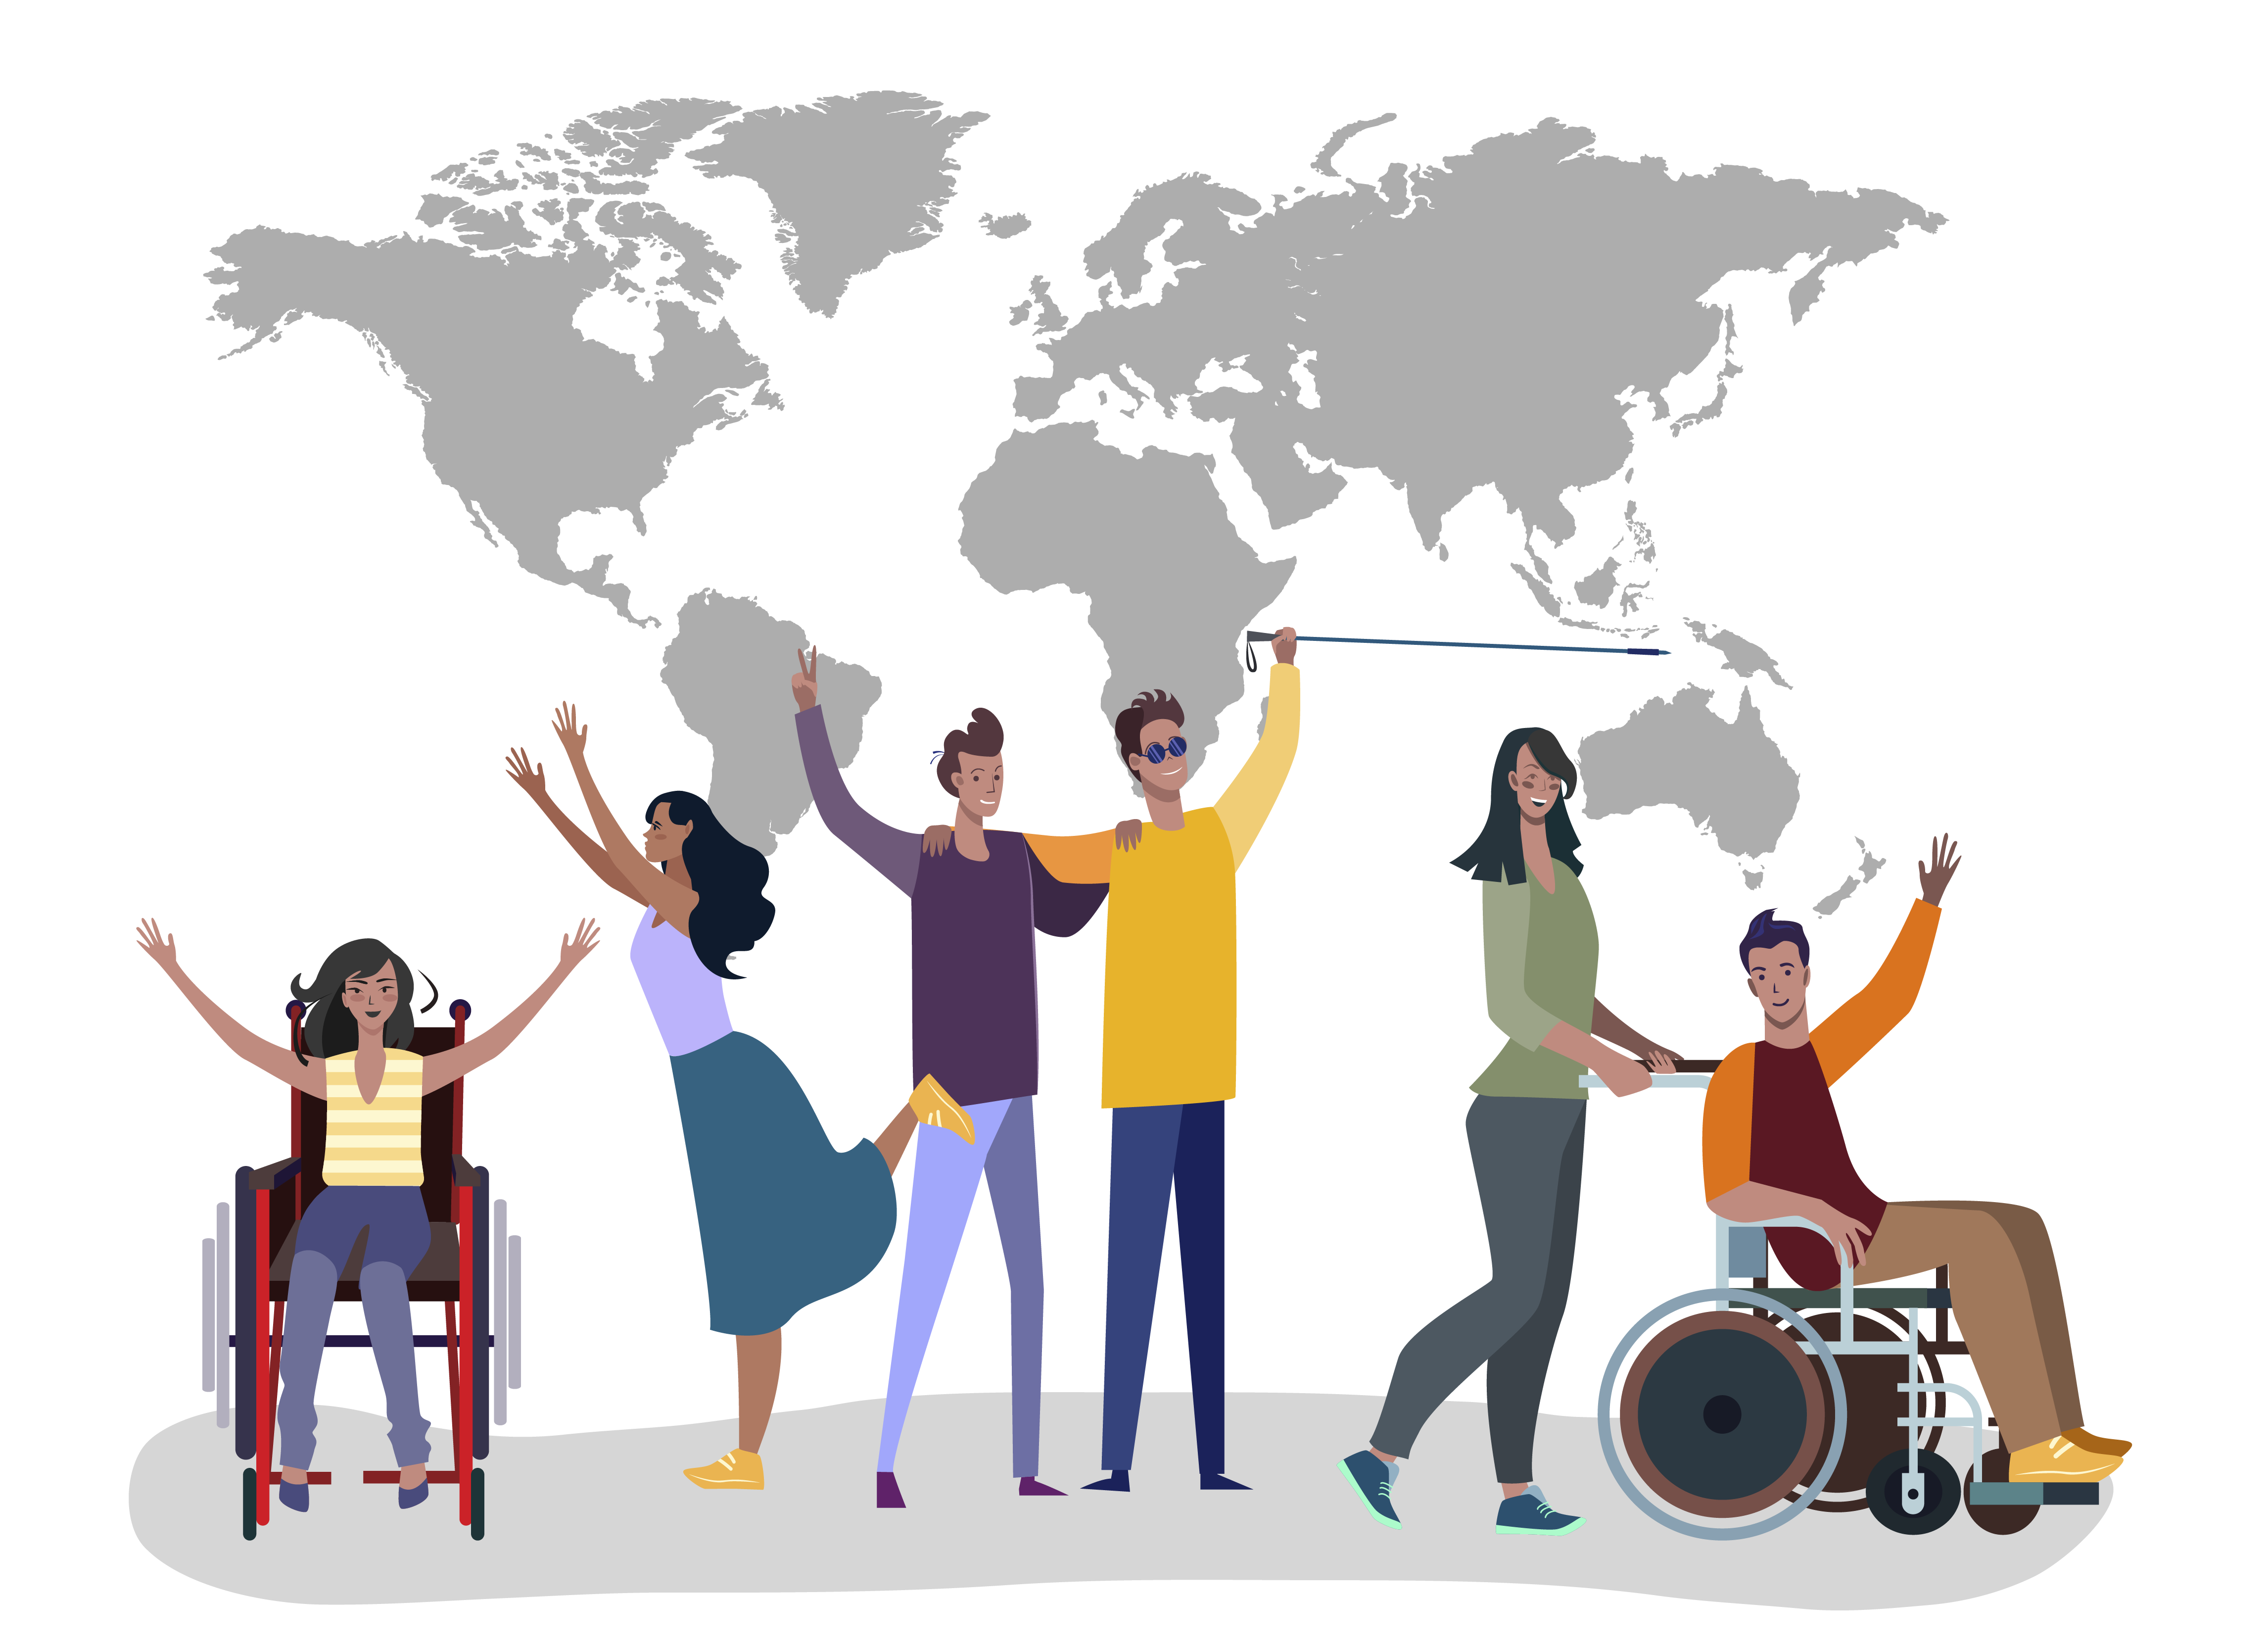 Vector illustration of various persons with disabilities and women all happily smiling in front of vector illustrated world map